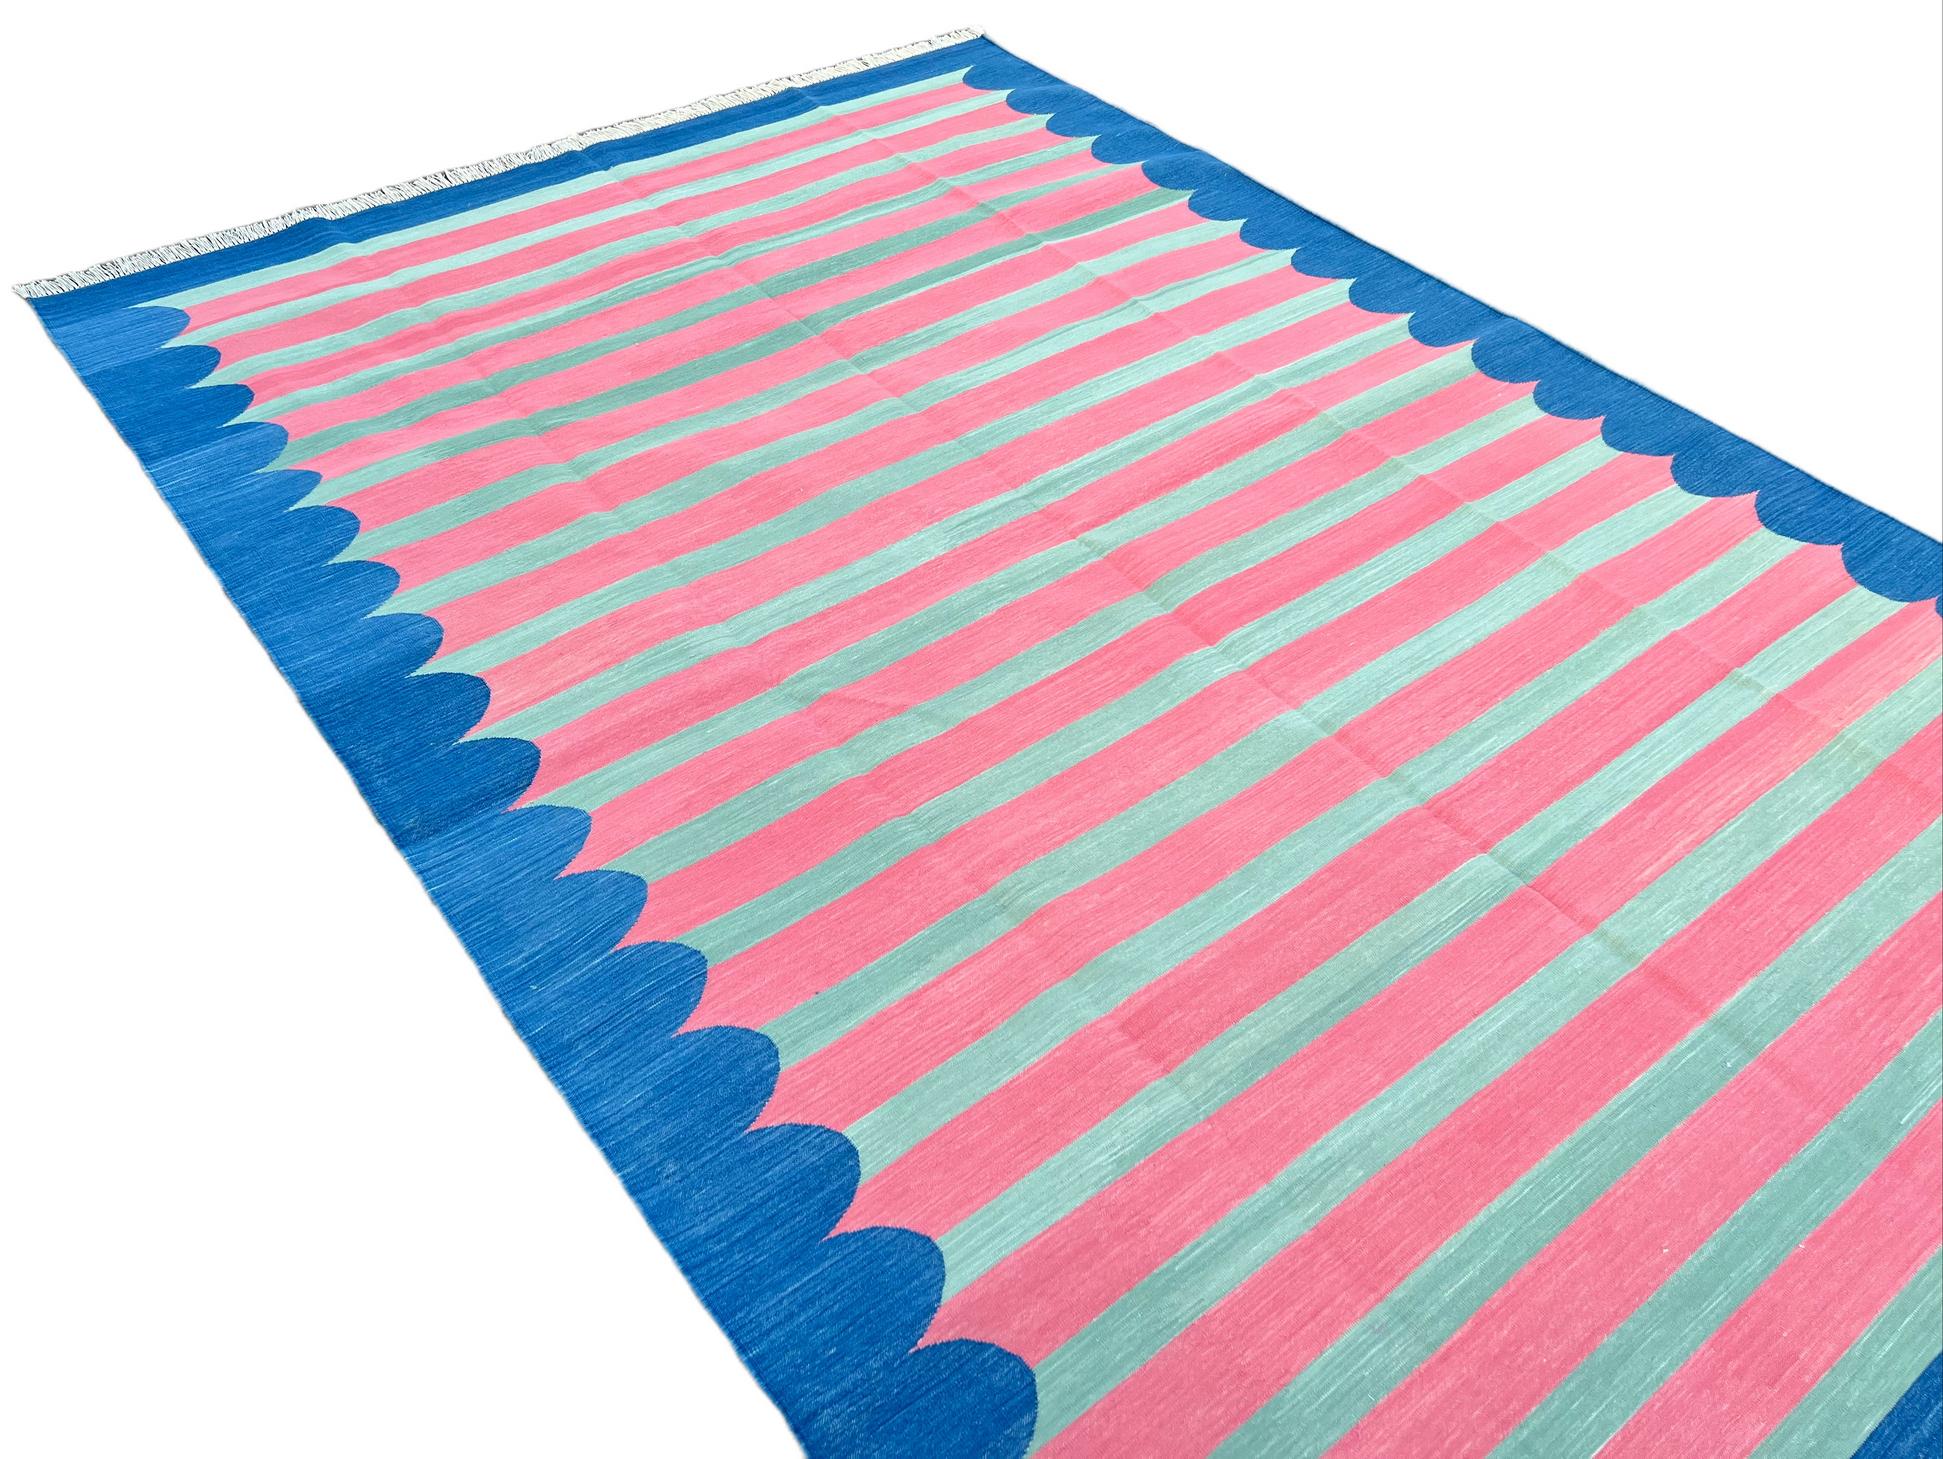 Hand-Woven Handmade Cotton Area Flat Weave Rug, Pink And Blue Scalloped Striped Dhurrie Rug For Sale